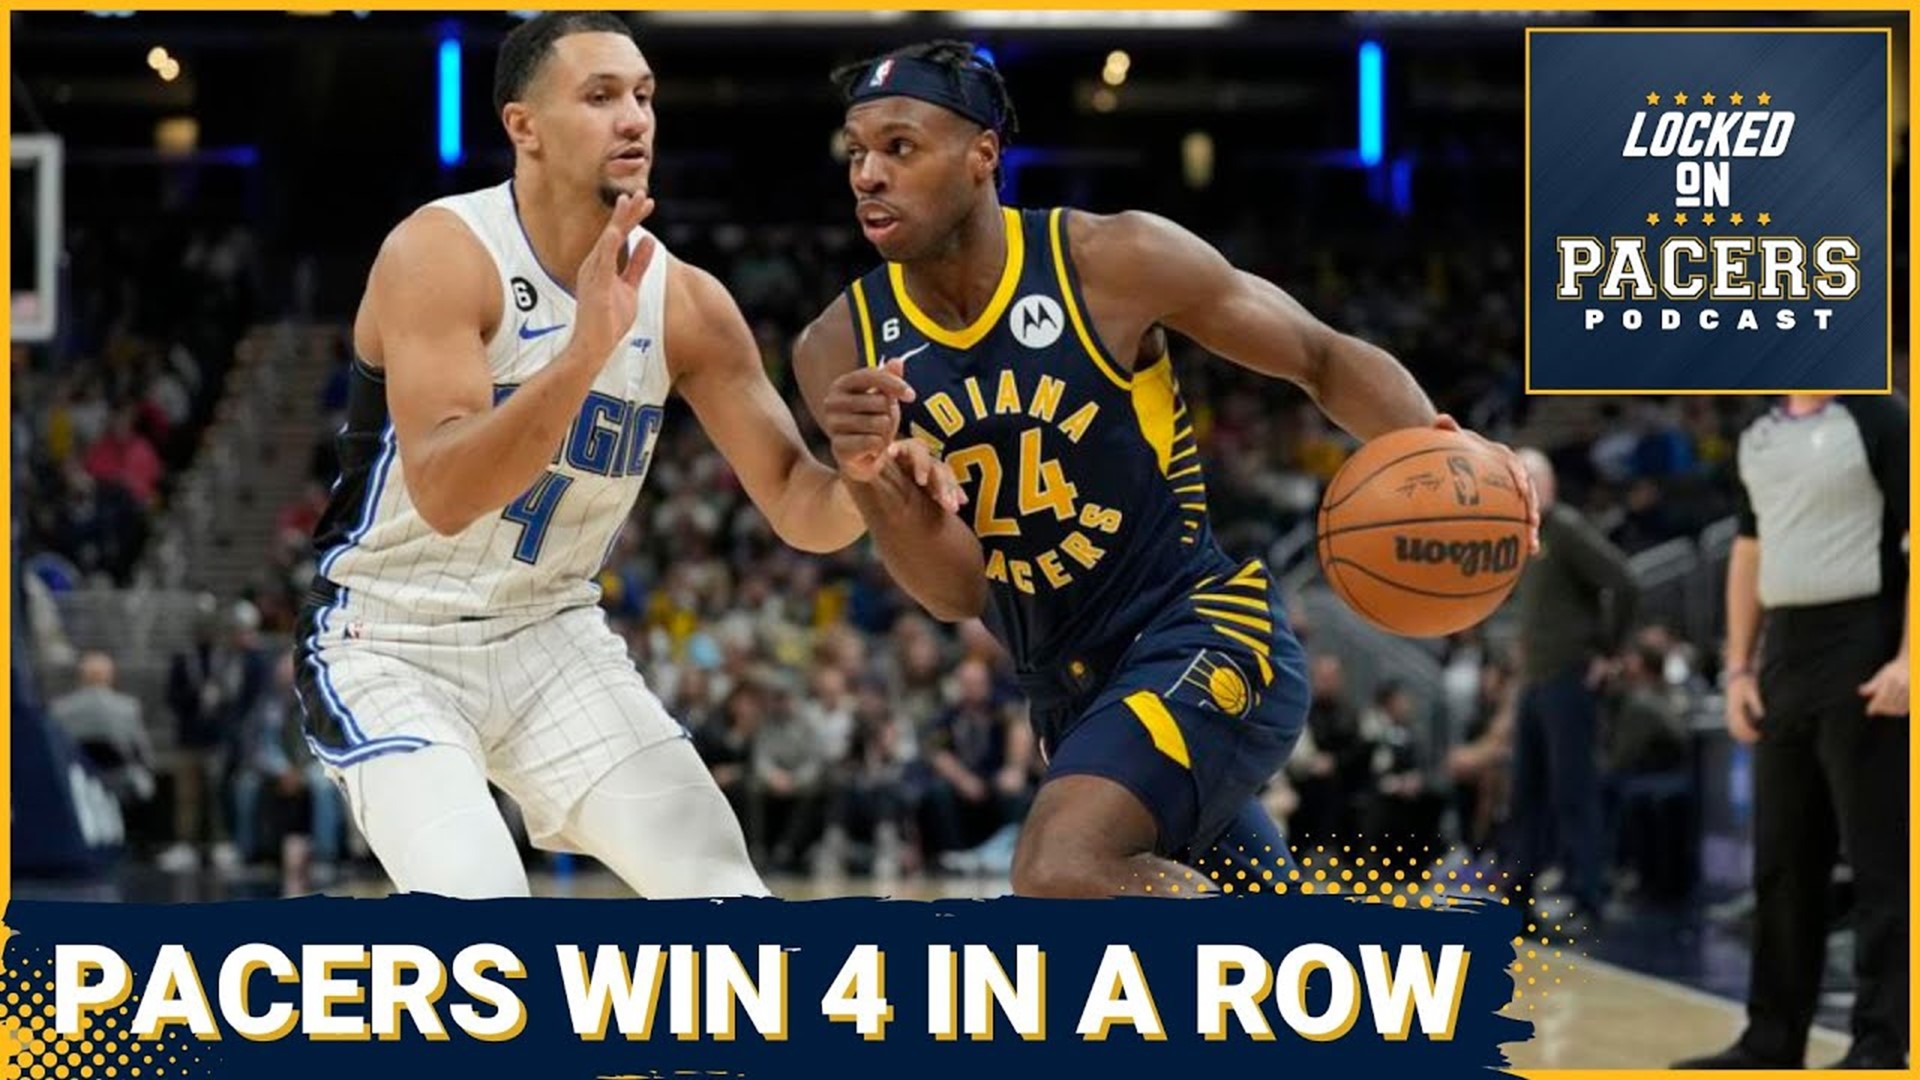 The Indiana Pacers can't be stopped as they have won four games in a row and eight out of ten